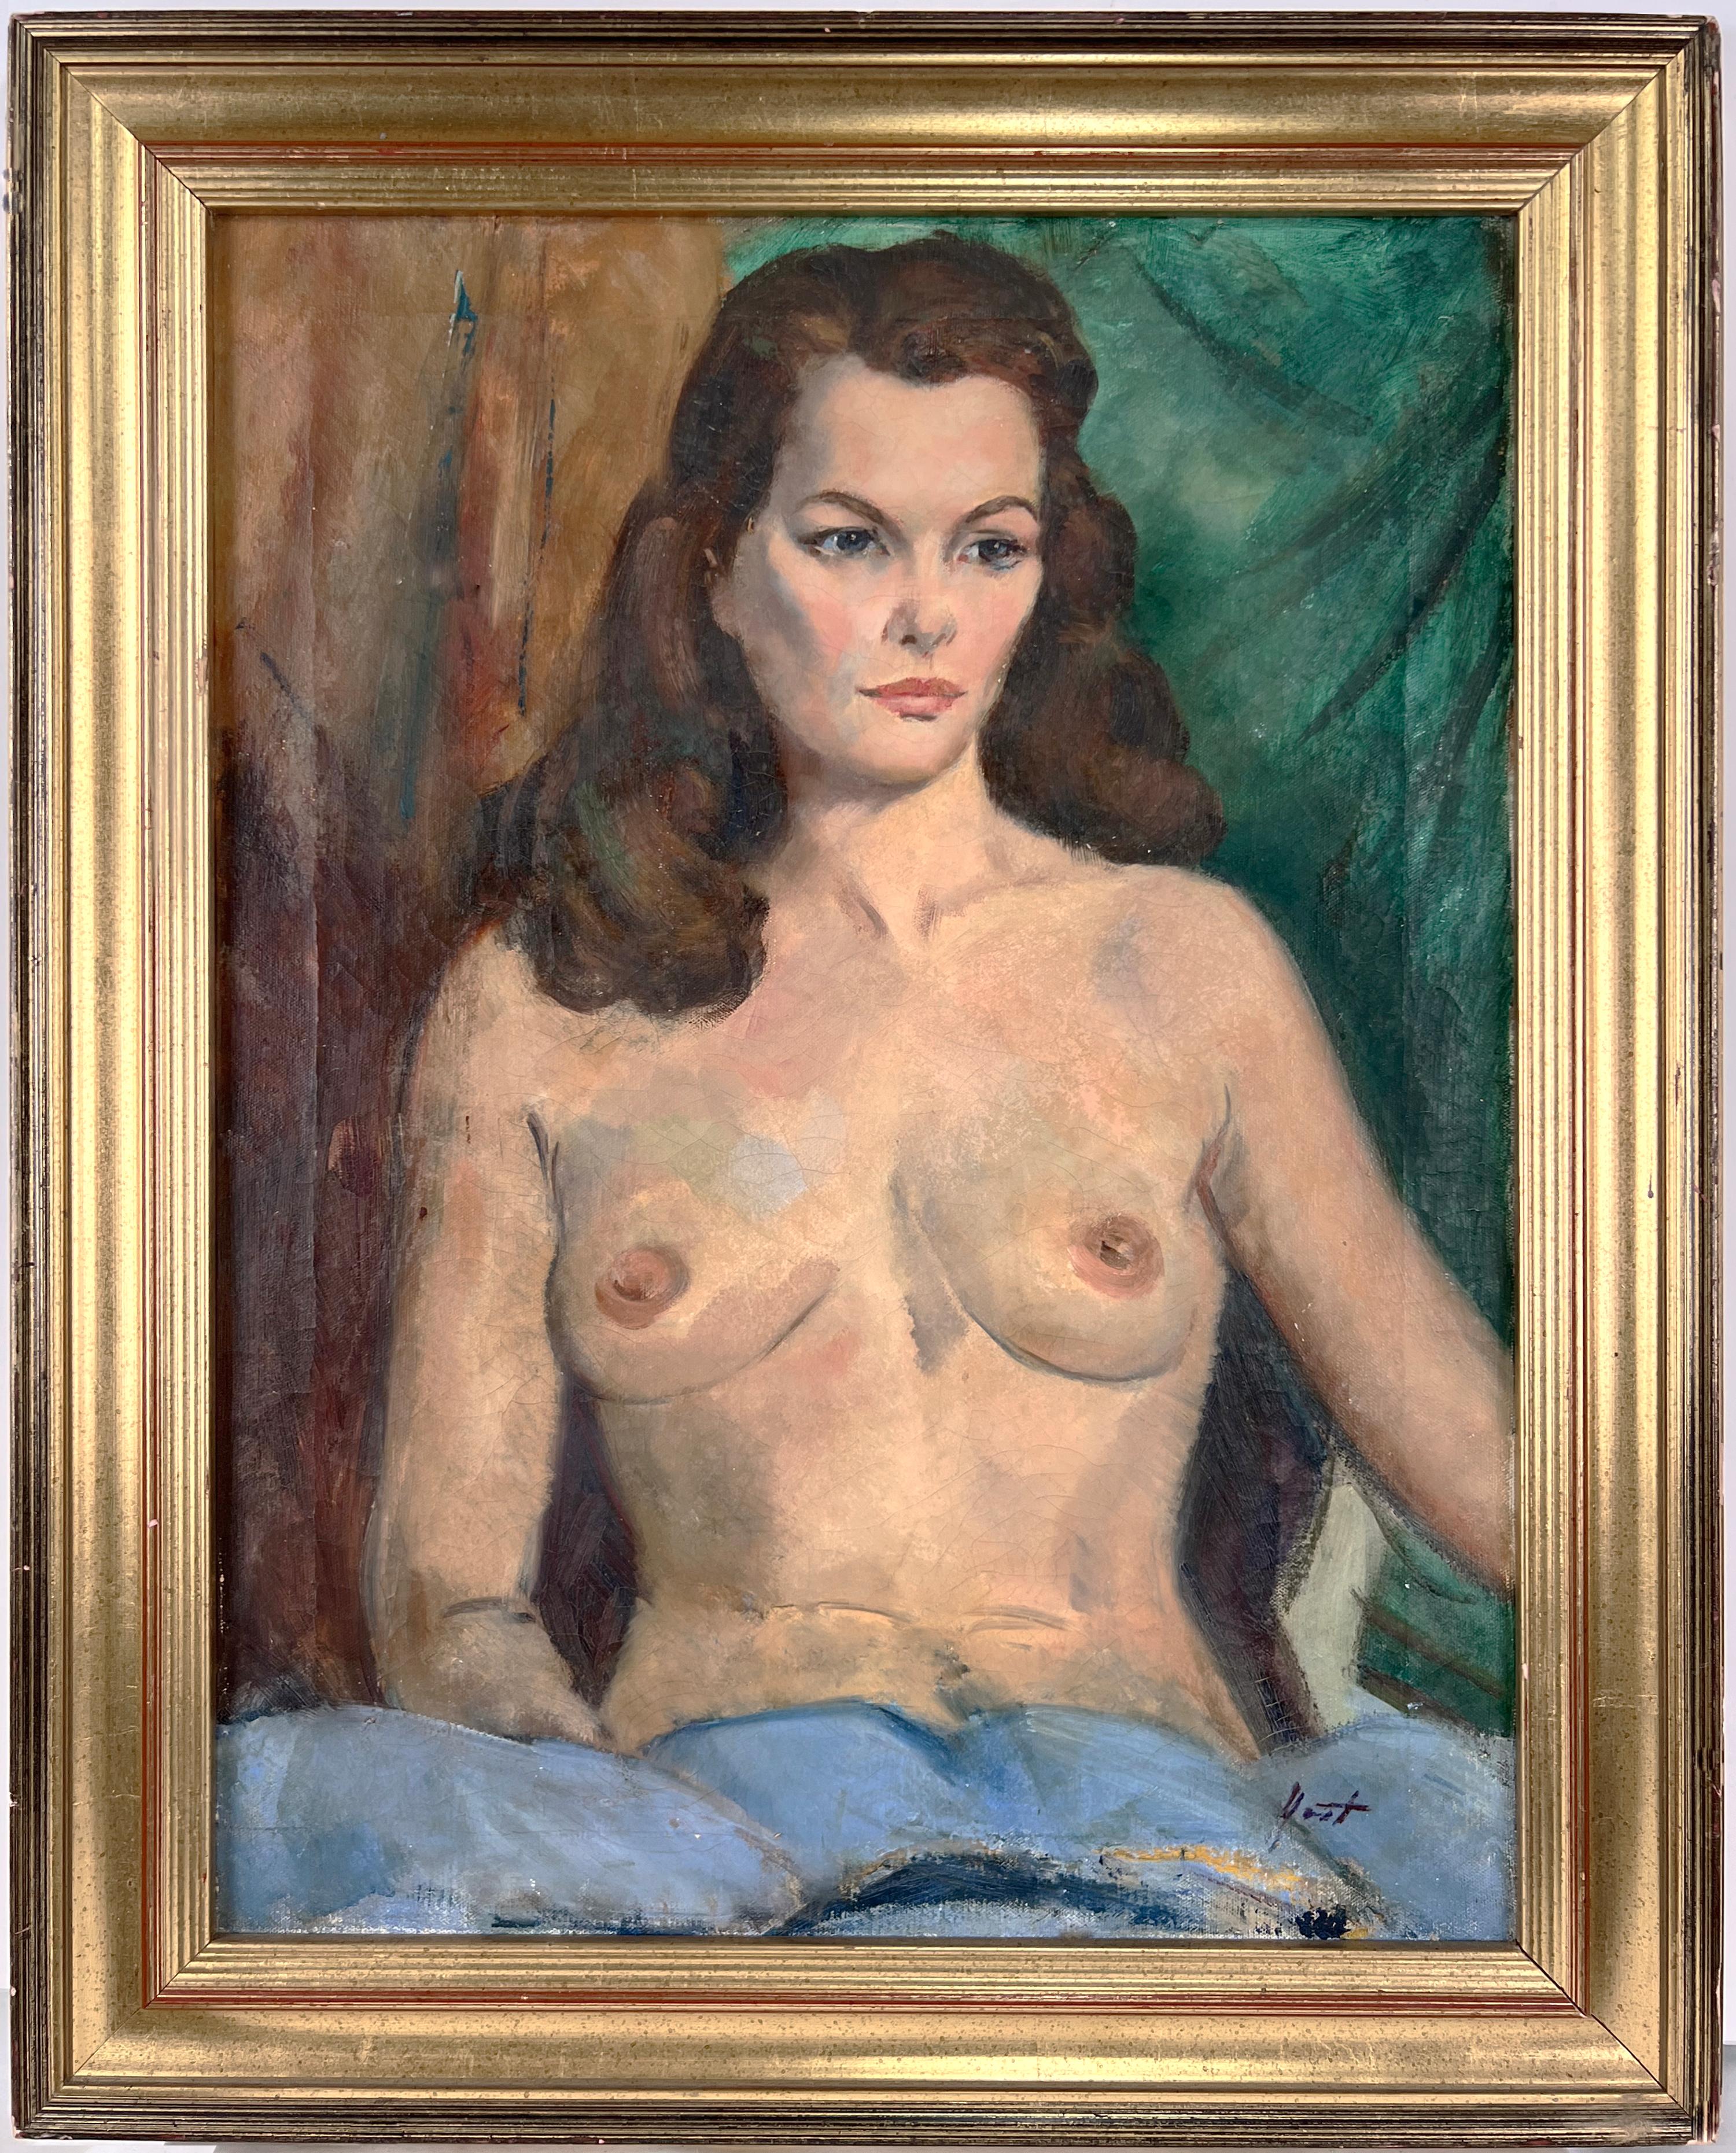 Frederick Yost Nude Painting - Seated Nude Woman American Impressionist School 1940s by Fred Yost 